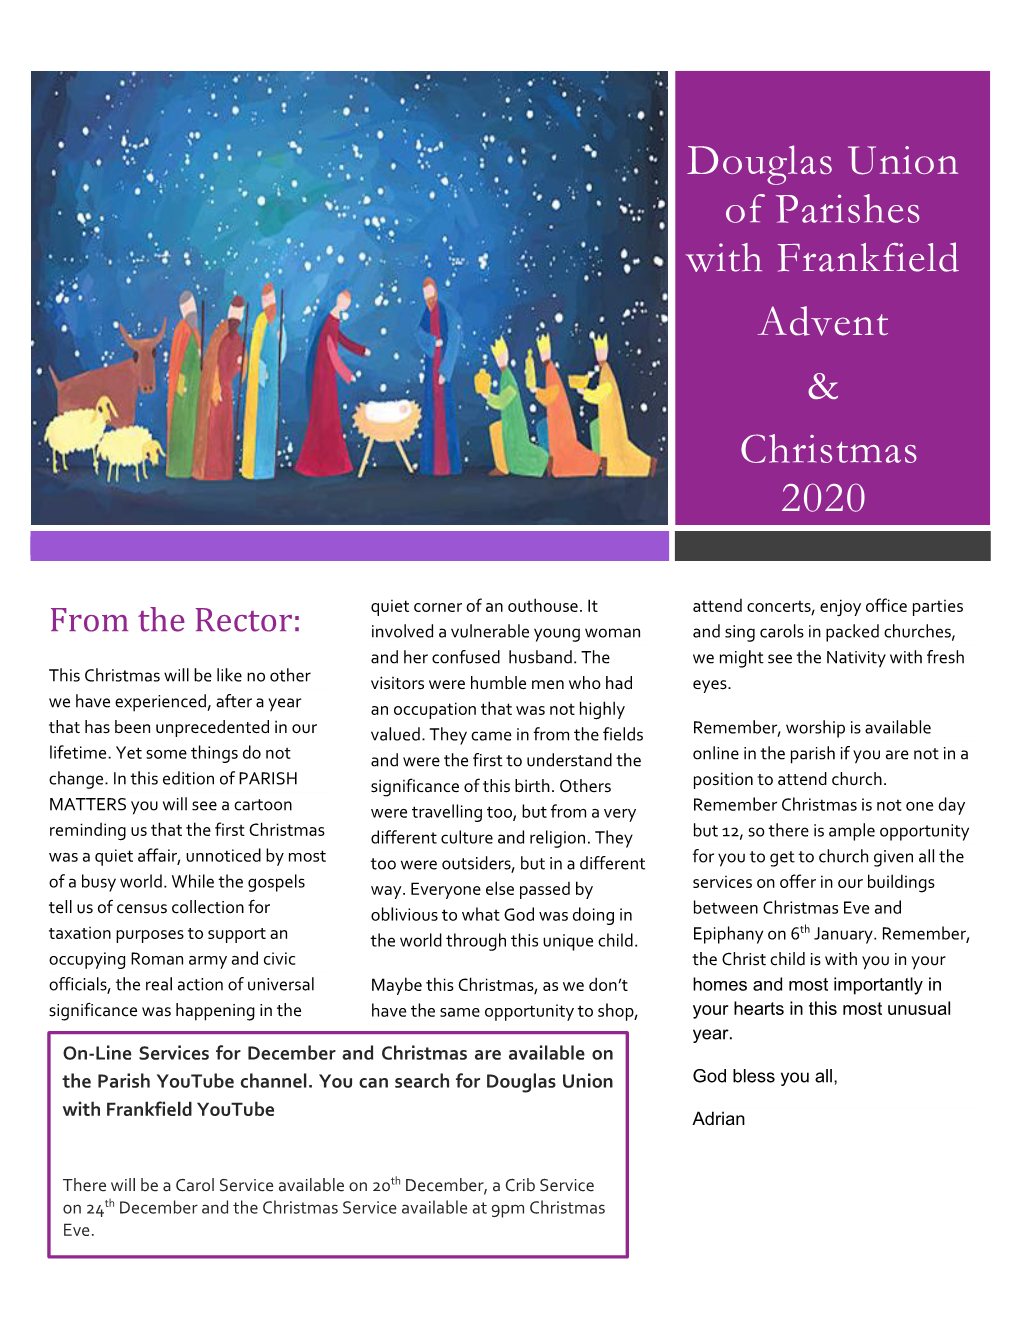 Douglas Union of Parishes with Frankfield Advent & Christmas 2020